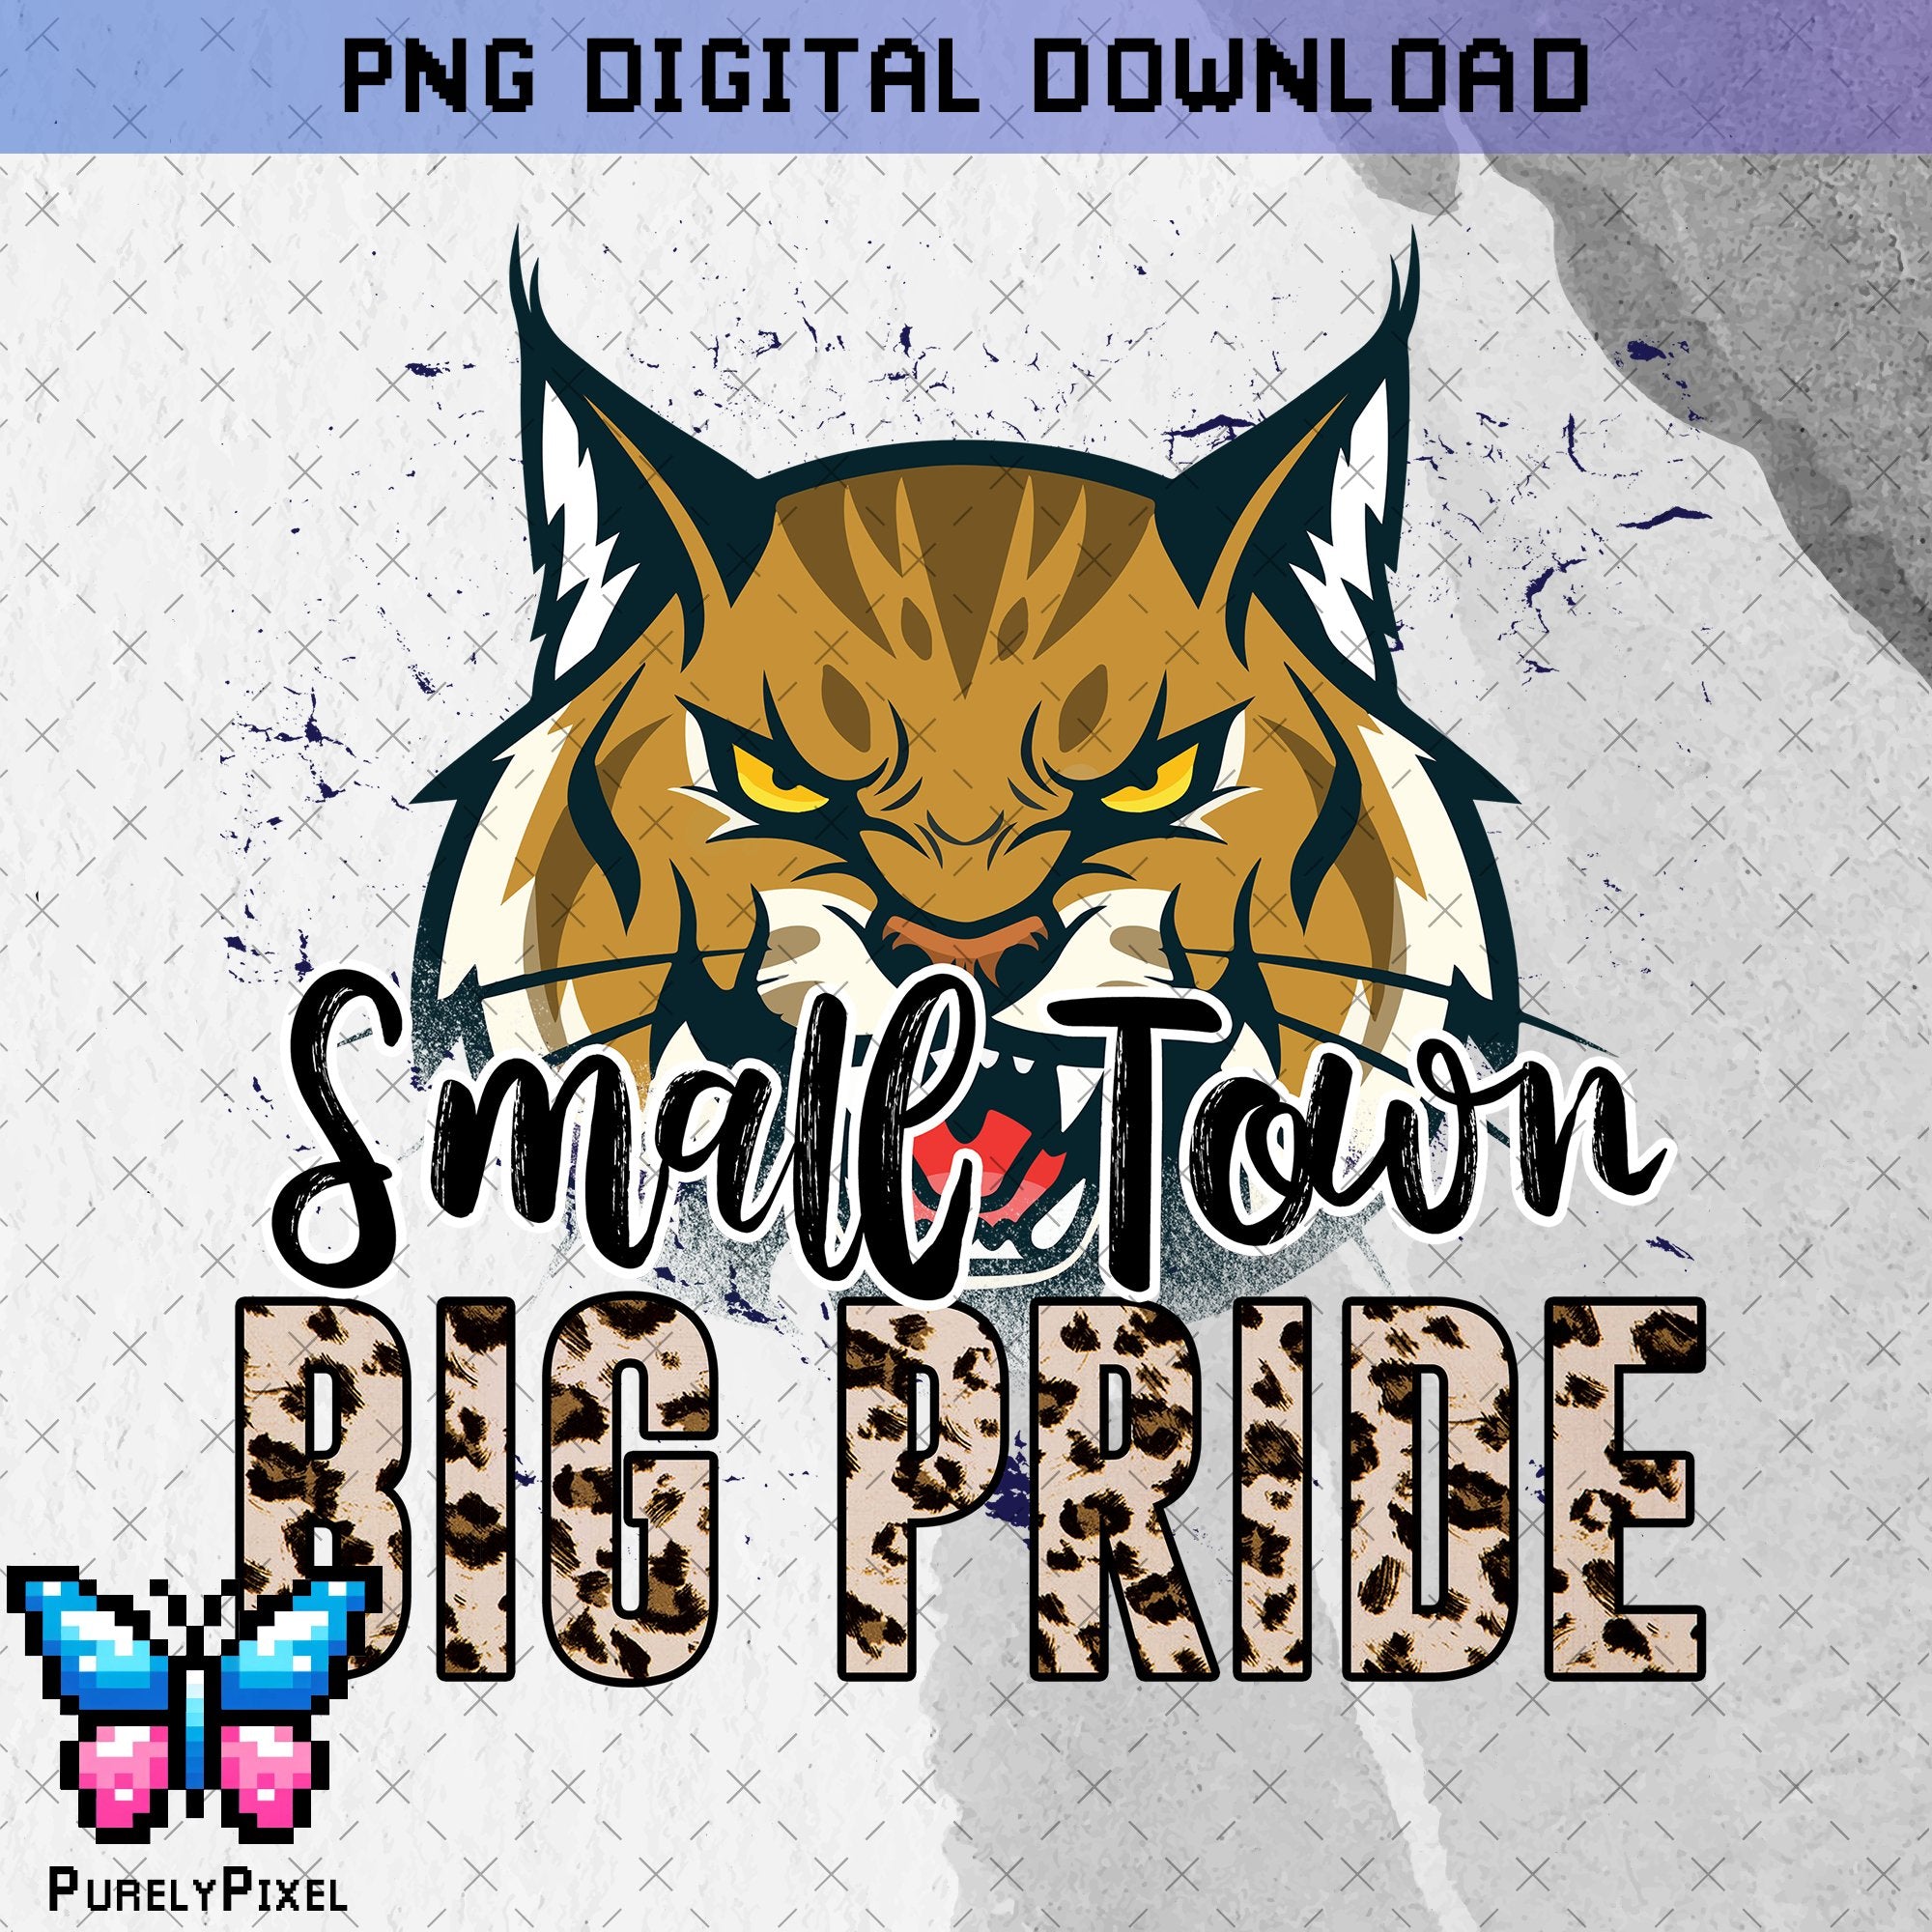 Bobcats Small Town Big Pride PNG Design for T-Shirts and More | PurelyPixels | Digital Download